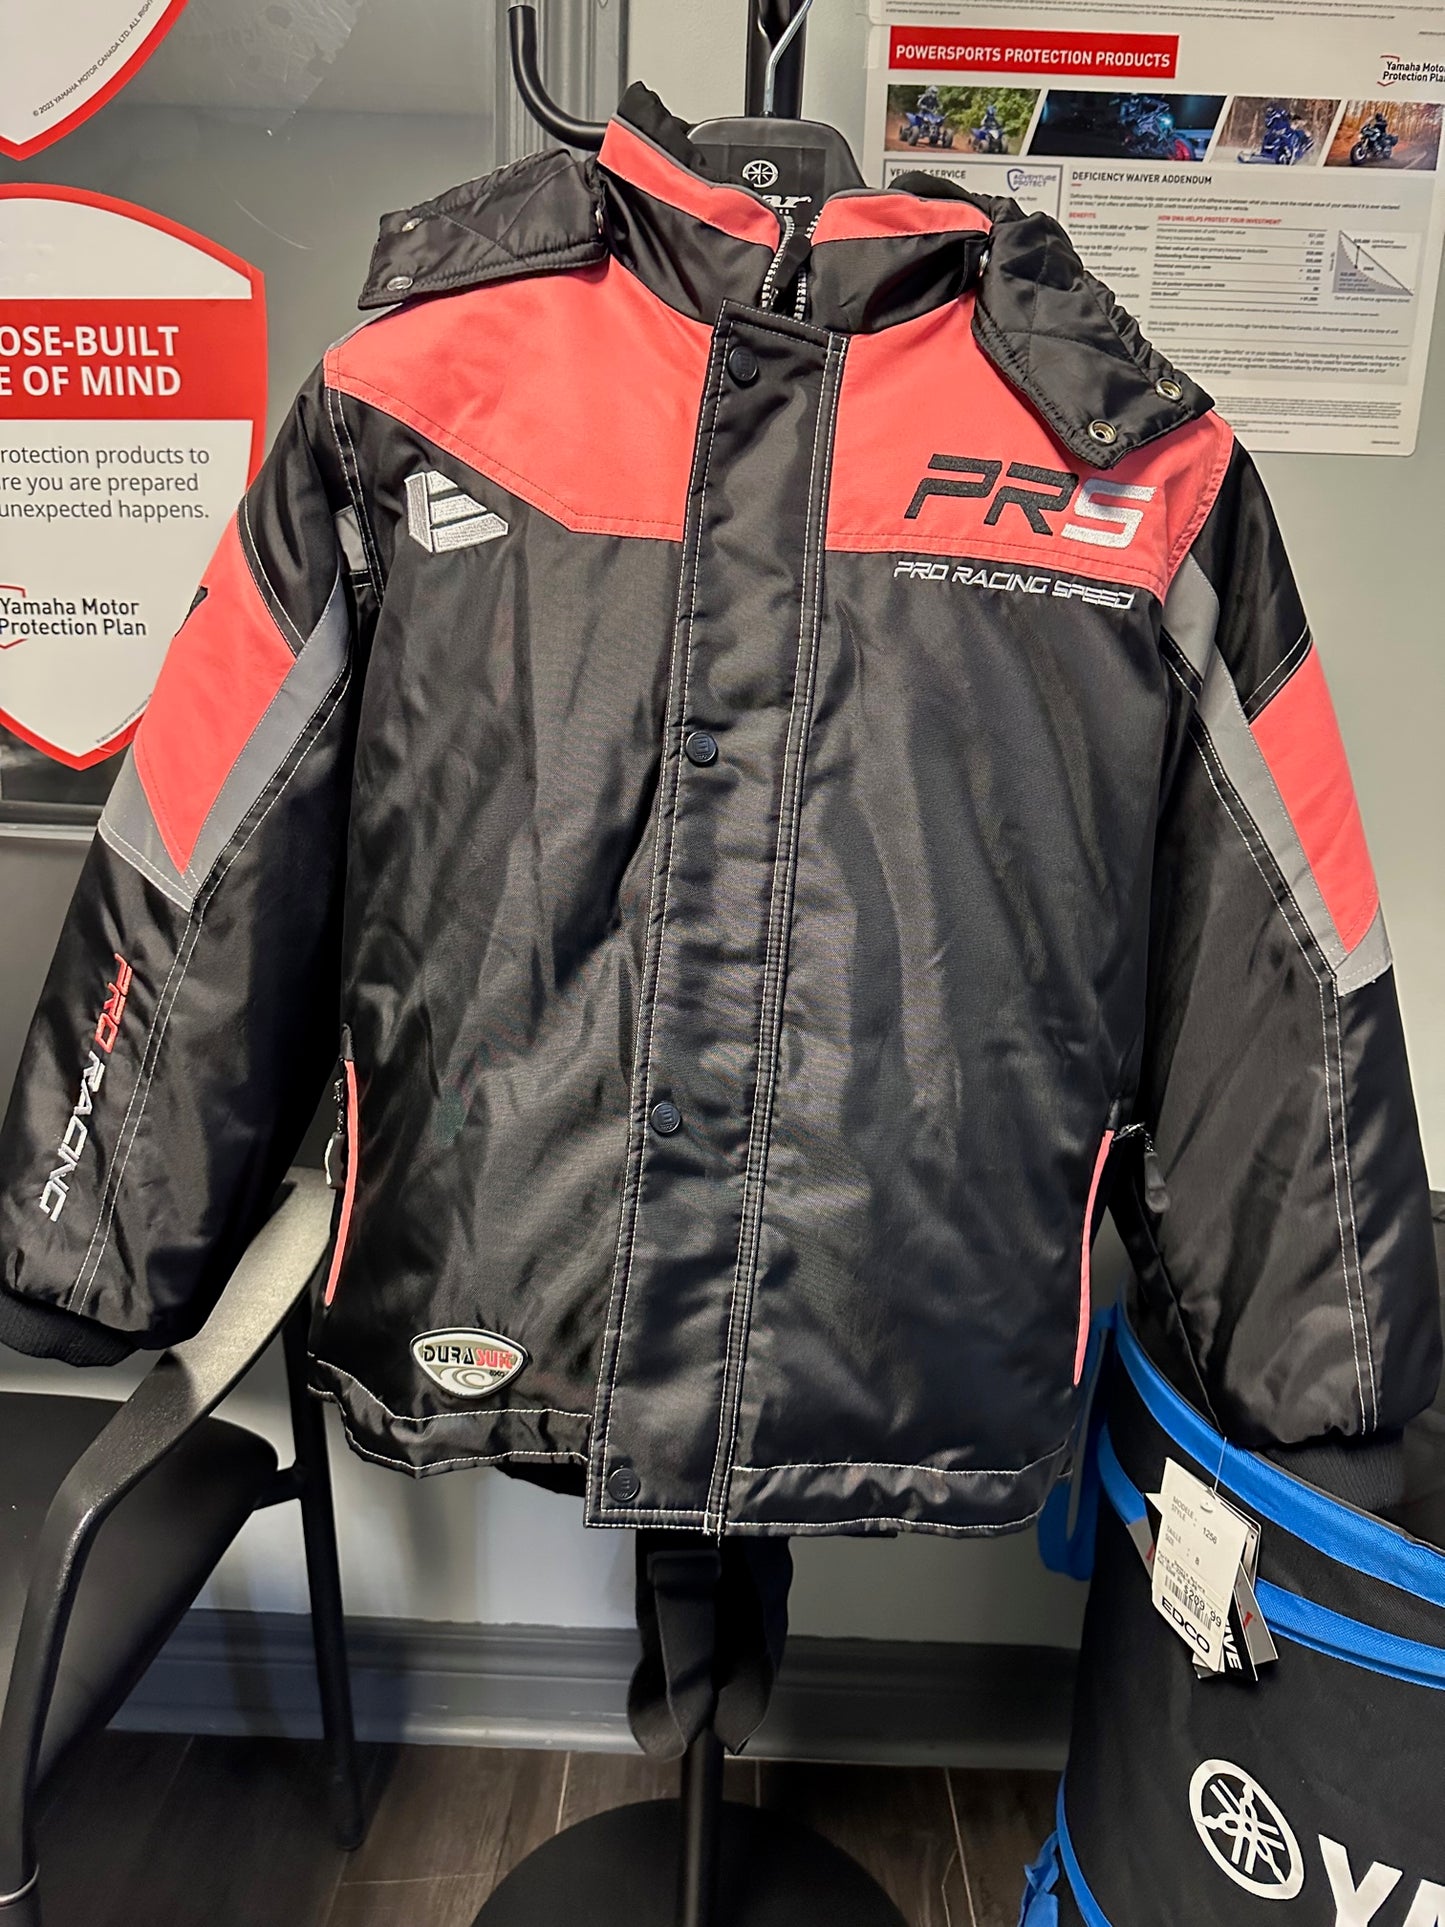 EDCO Pro Racing Winter Jacket ONLY - Junior Size 14